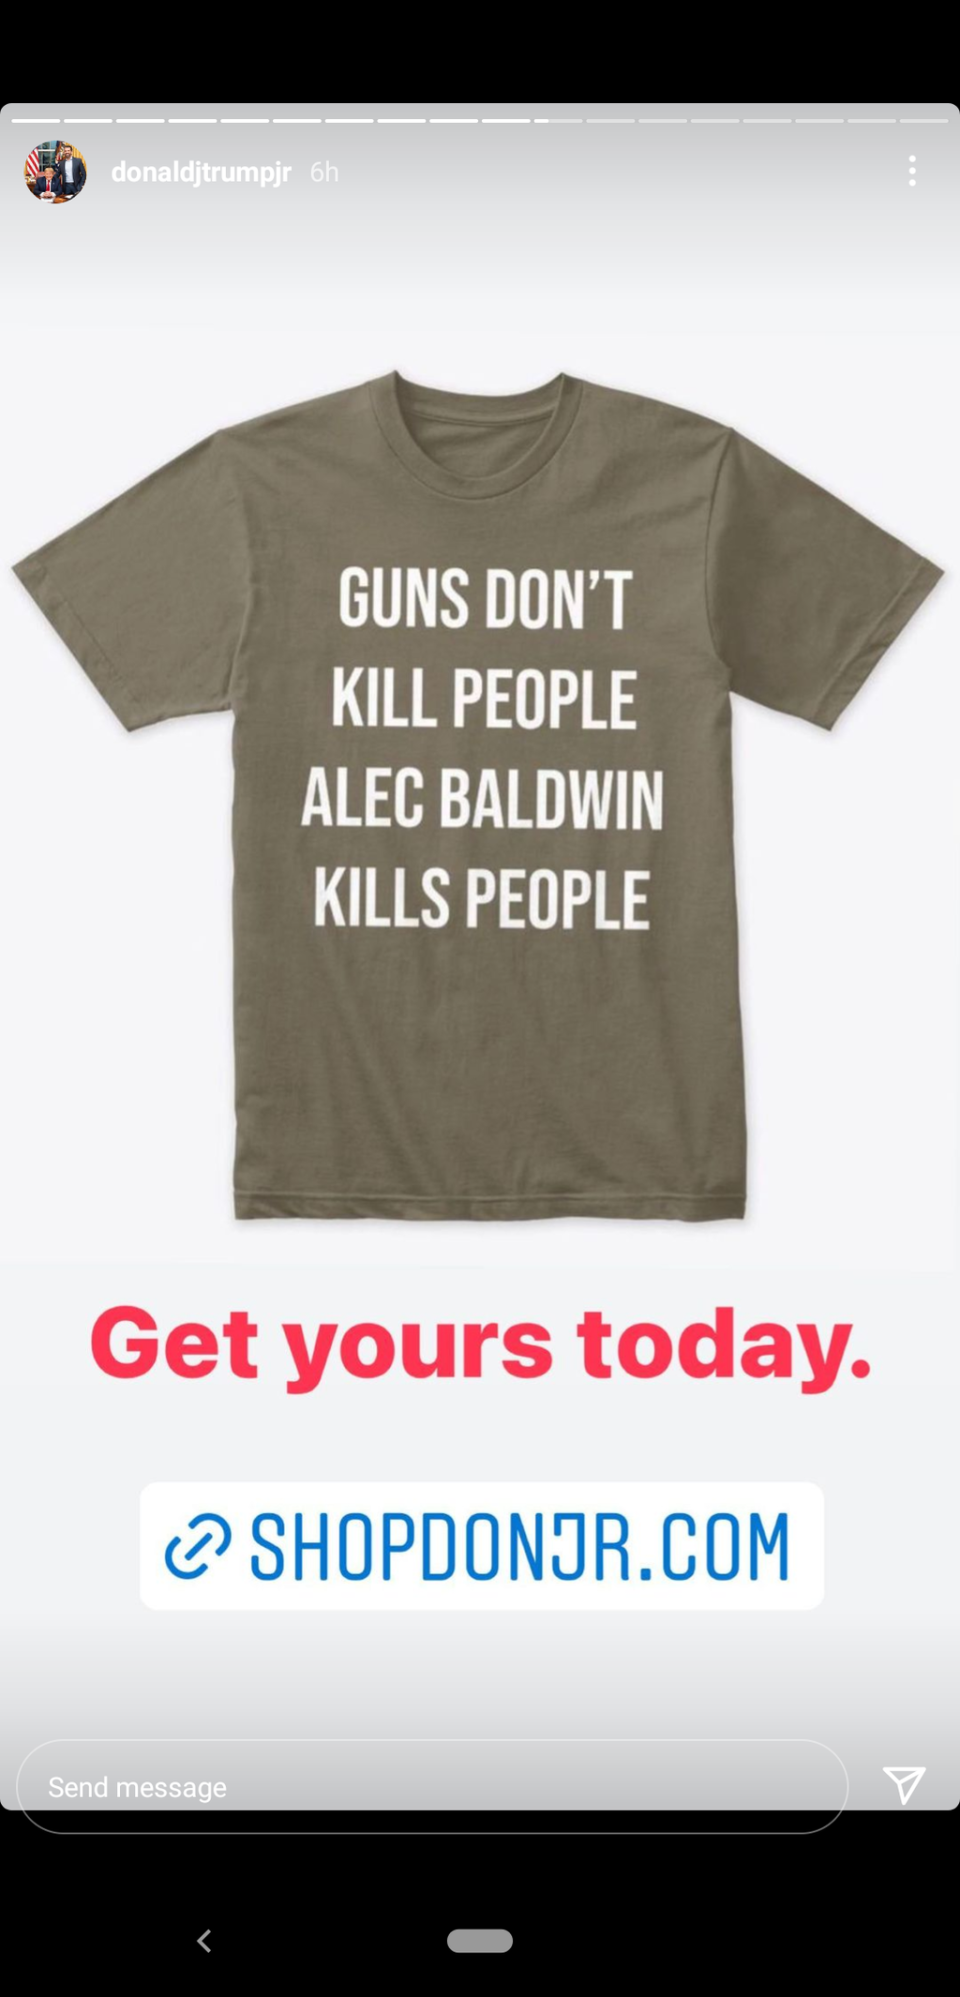 The Instagram story shared by Donald Trump Jr also shares a link to shop for the T-shirt (Instagram/ Donald Trump Jr)